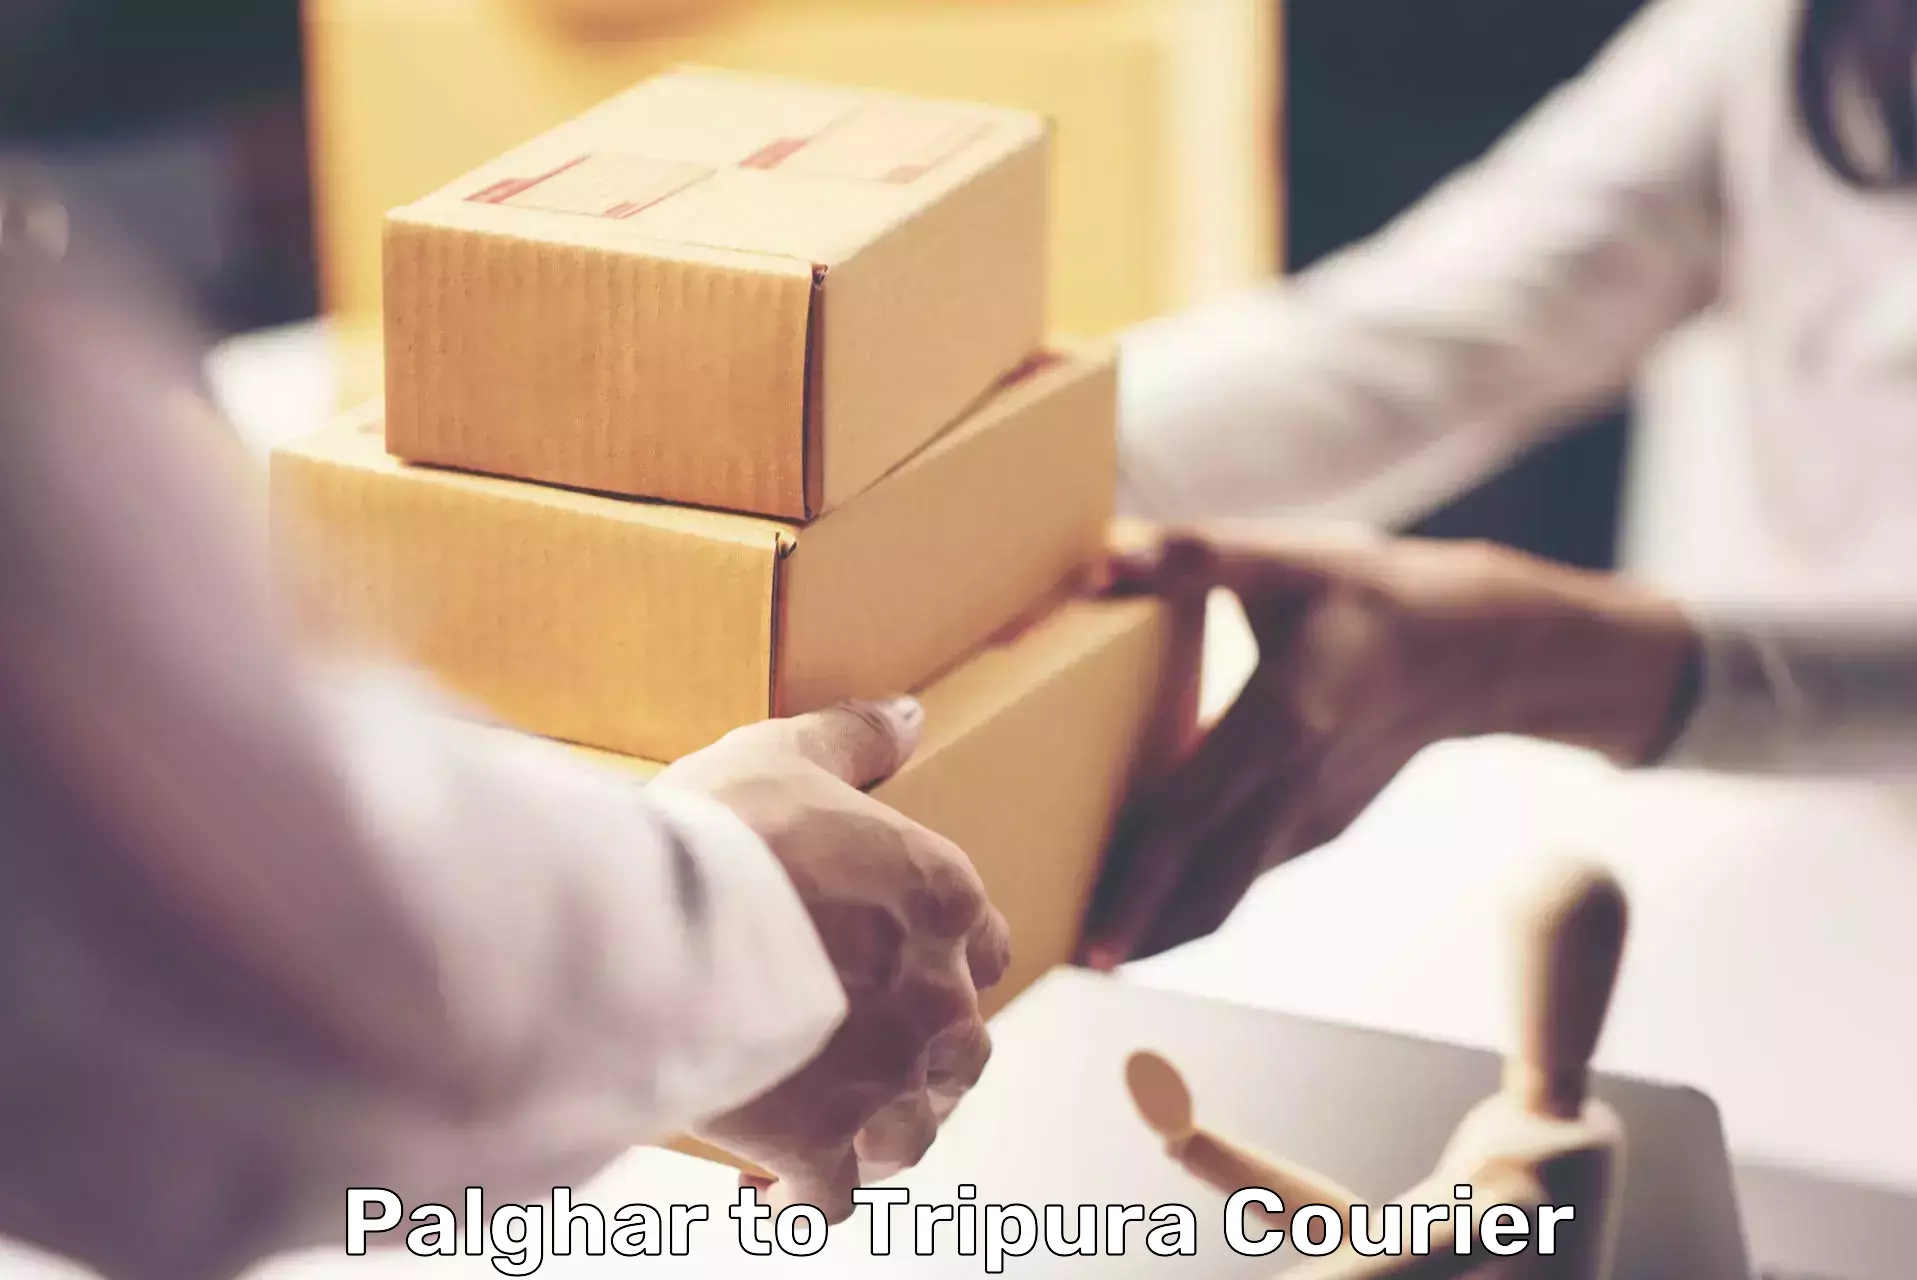 Customer-oriented courier services Palghar to Udaipur Tripura